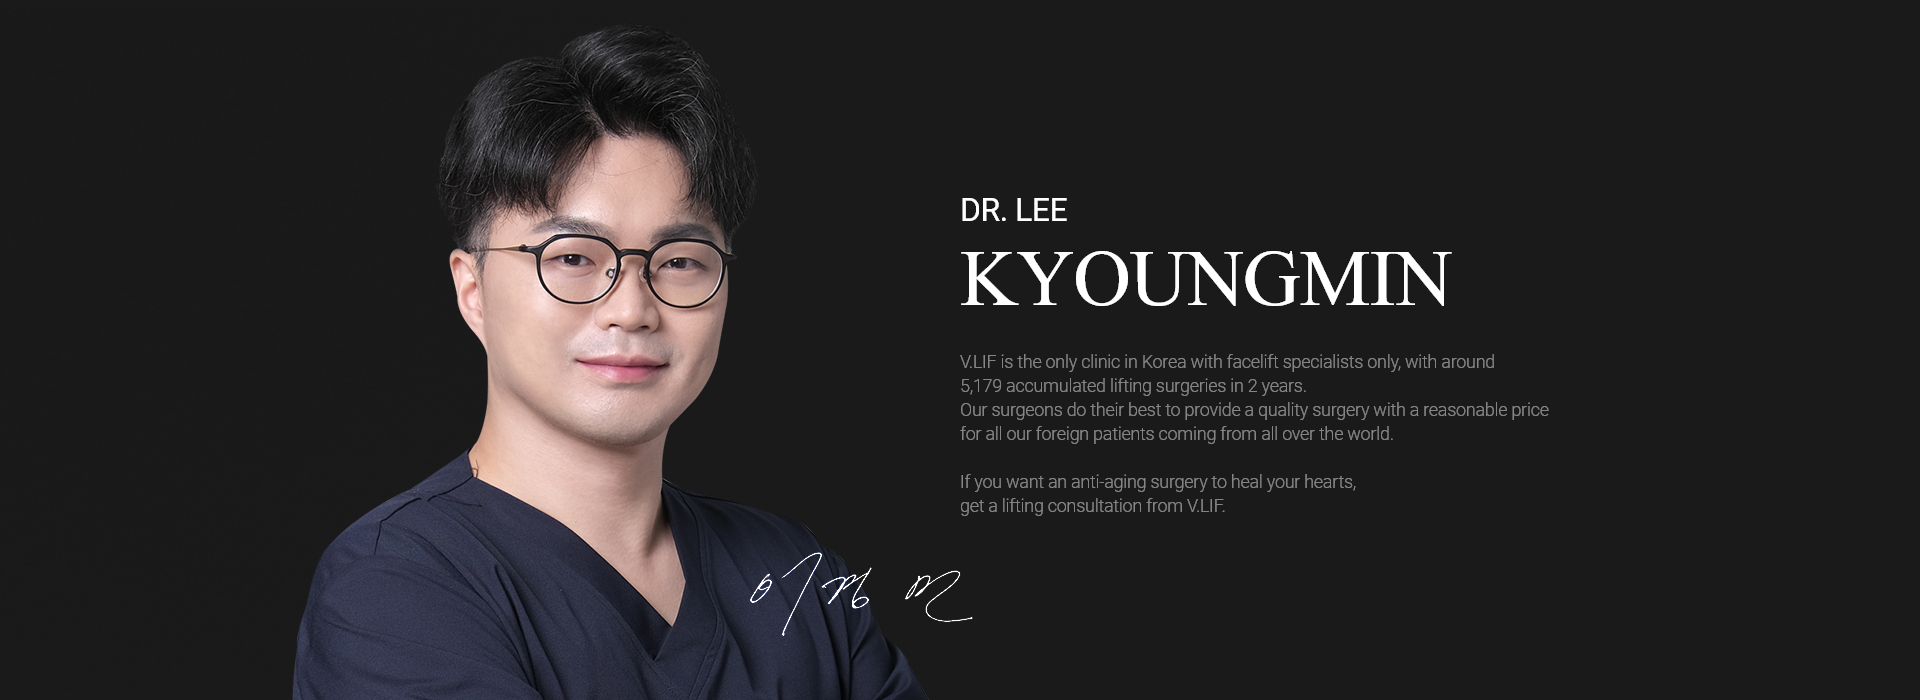 Dr. Lee Kyoung Min V.LIF is the only clinic in Korea with facelift specialists only, with around 2,000 lifting surgeries being performed every year. Our surgeons do their best to provide a quality surgery with a reasonable price for all our foreign patients coming from all over the world. If you want an anti-aging surgery to heal your hearts, get a lifting consultation from V.LIF.